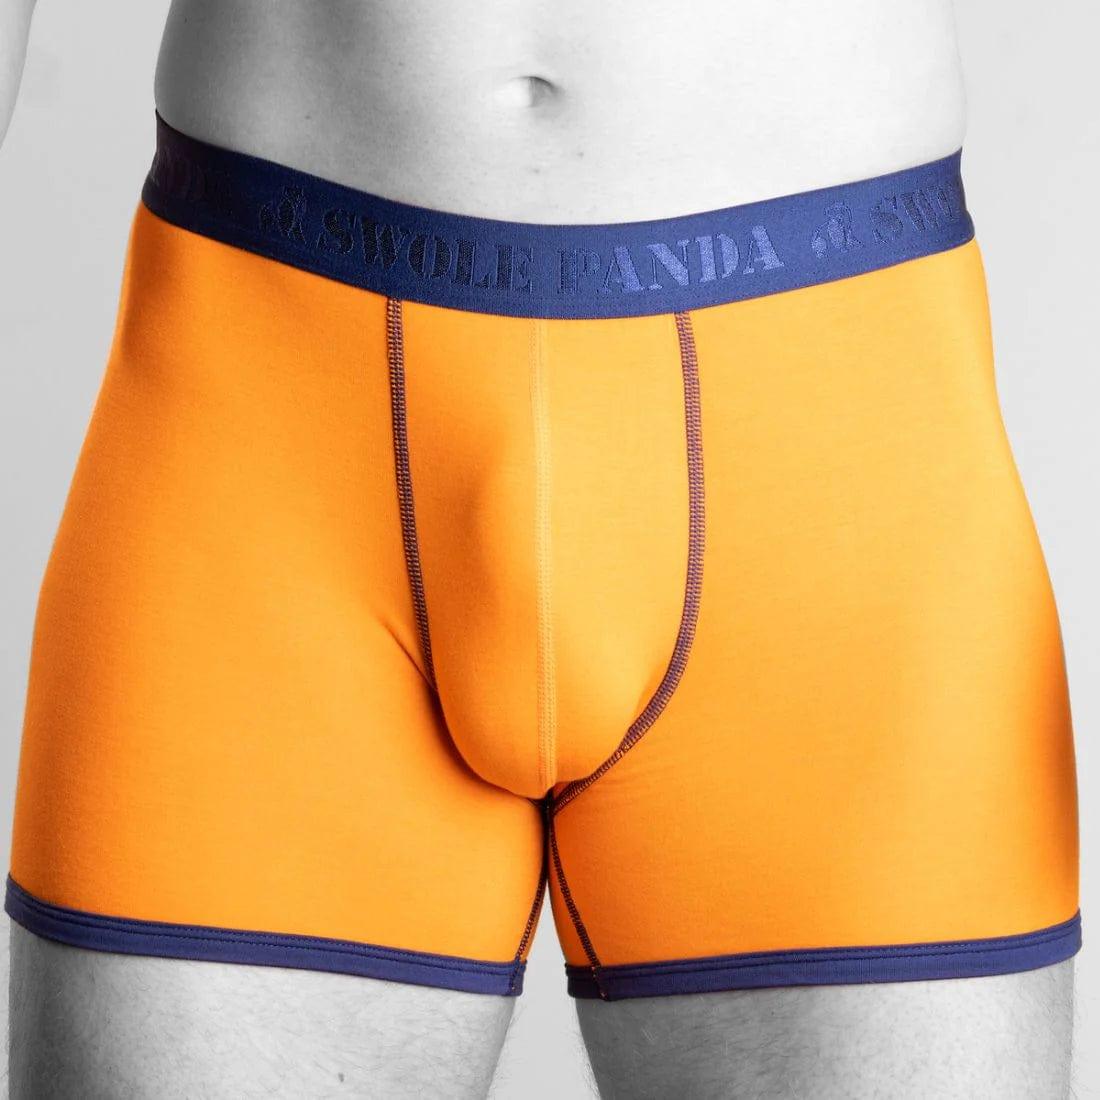 Swole Panda Mens Accessories Orange Bamboo Boxer with Blue Waistband